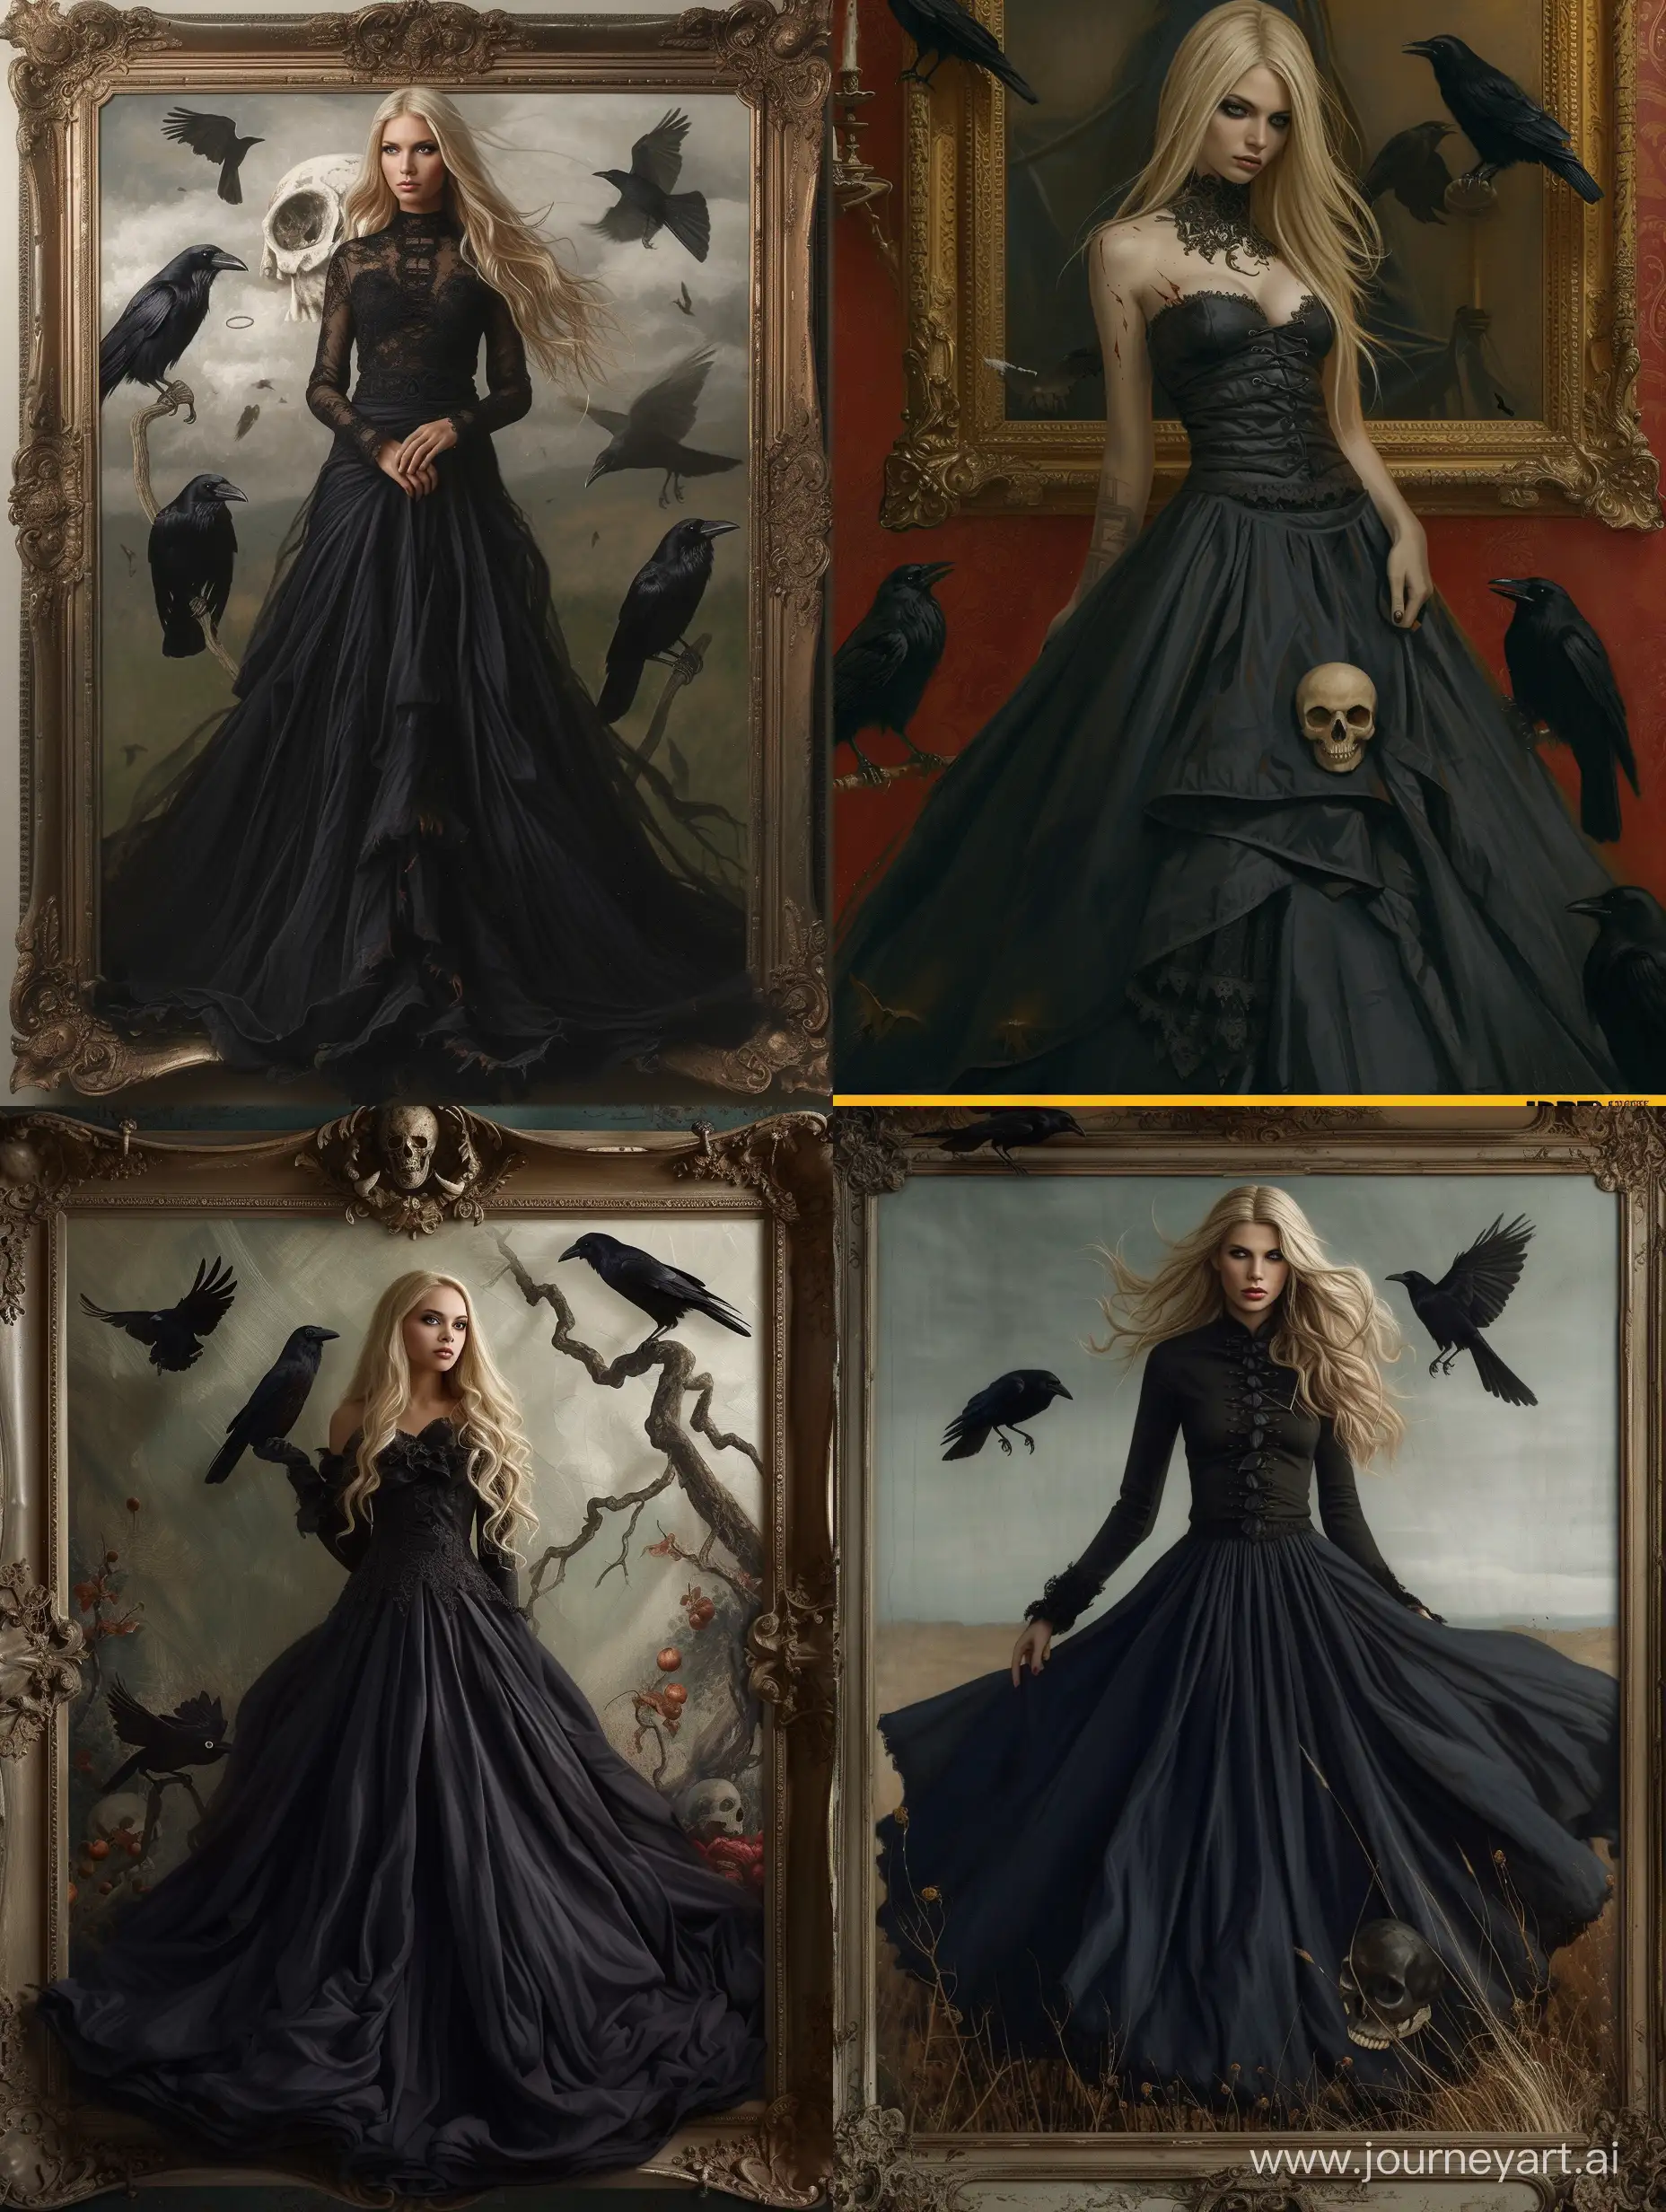 Trish, DMC5, fantasy art, beautiful necromancer girl, DND style, the sorceress, blonde, crows and a skull, DND style, sorceress, long black dress, hyperrealism, dramatic frame, photorealism, scene from hyperrealism, dramatic frame, photorealism, a scene from a movie